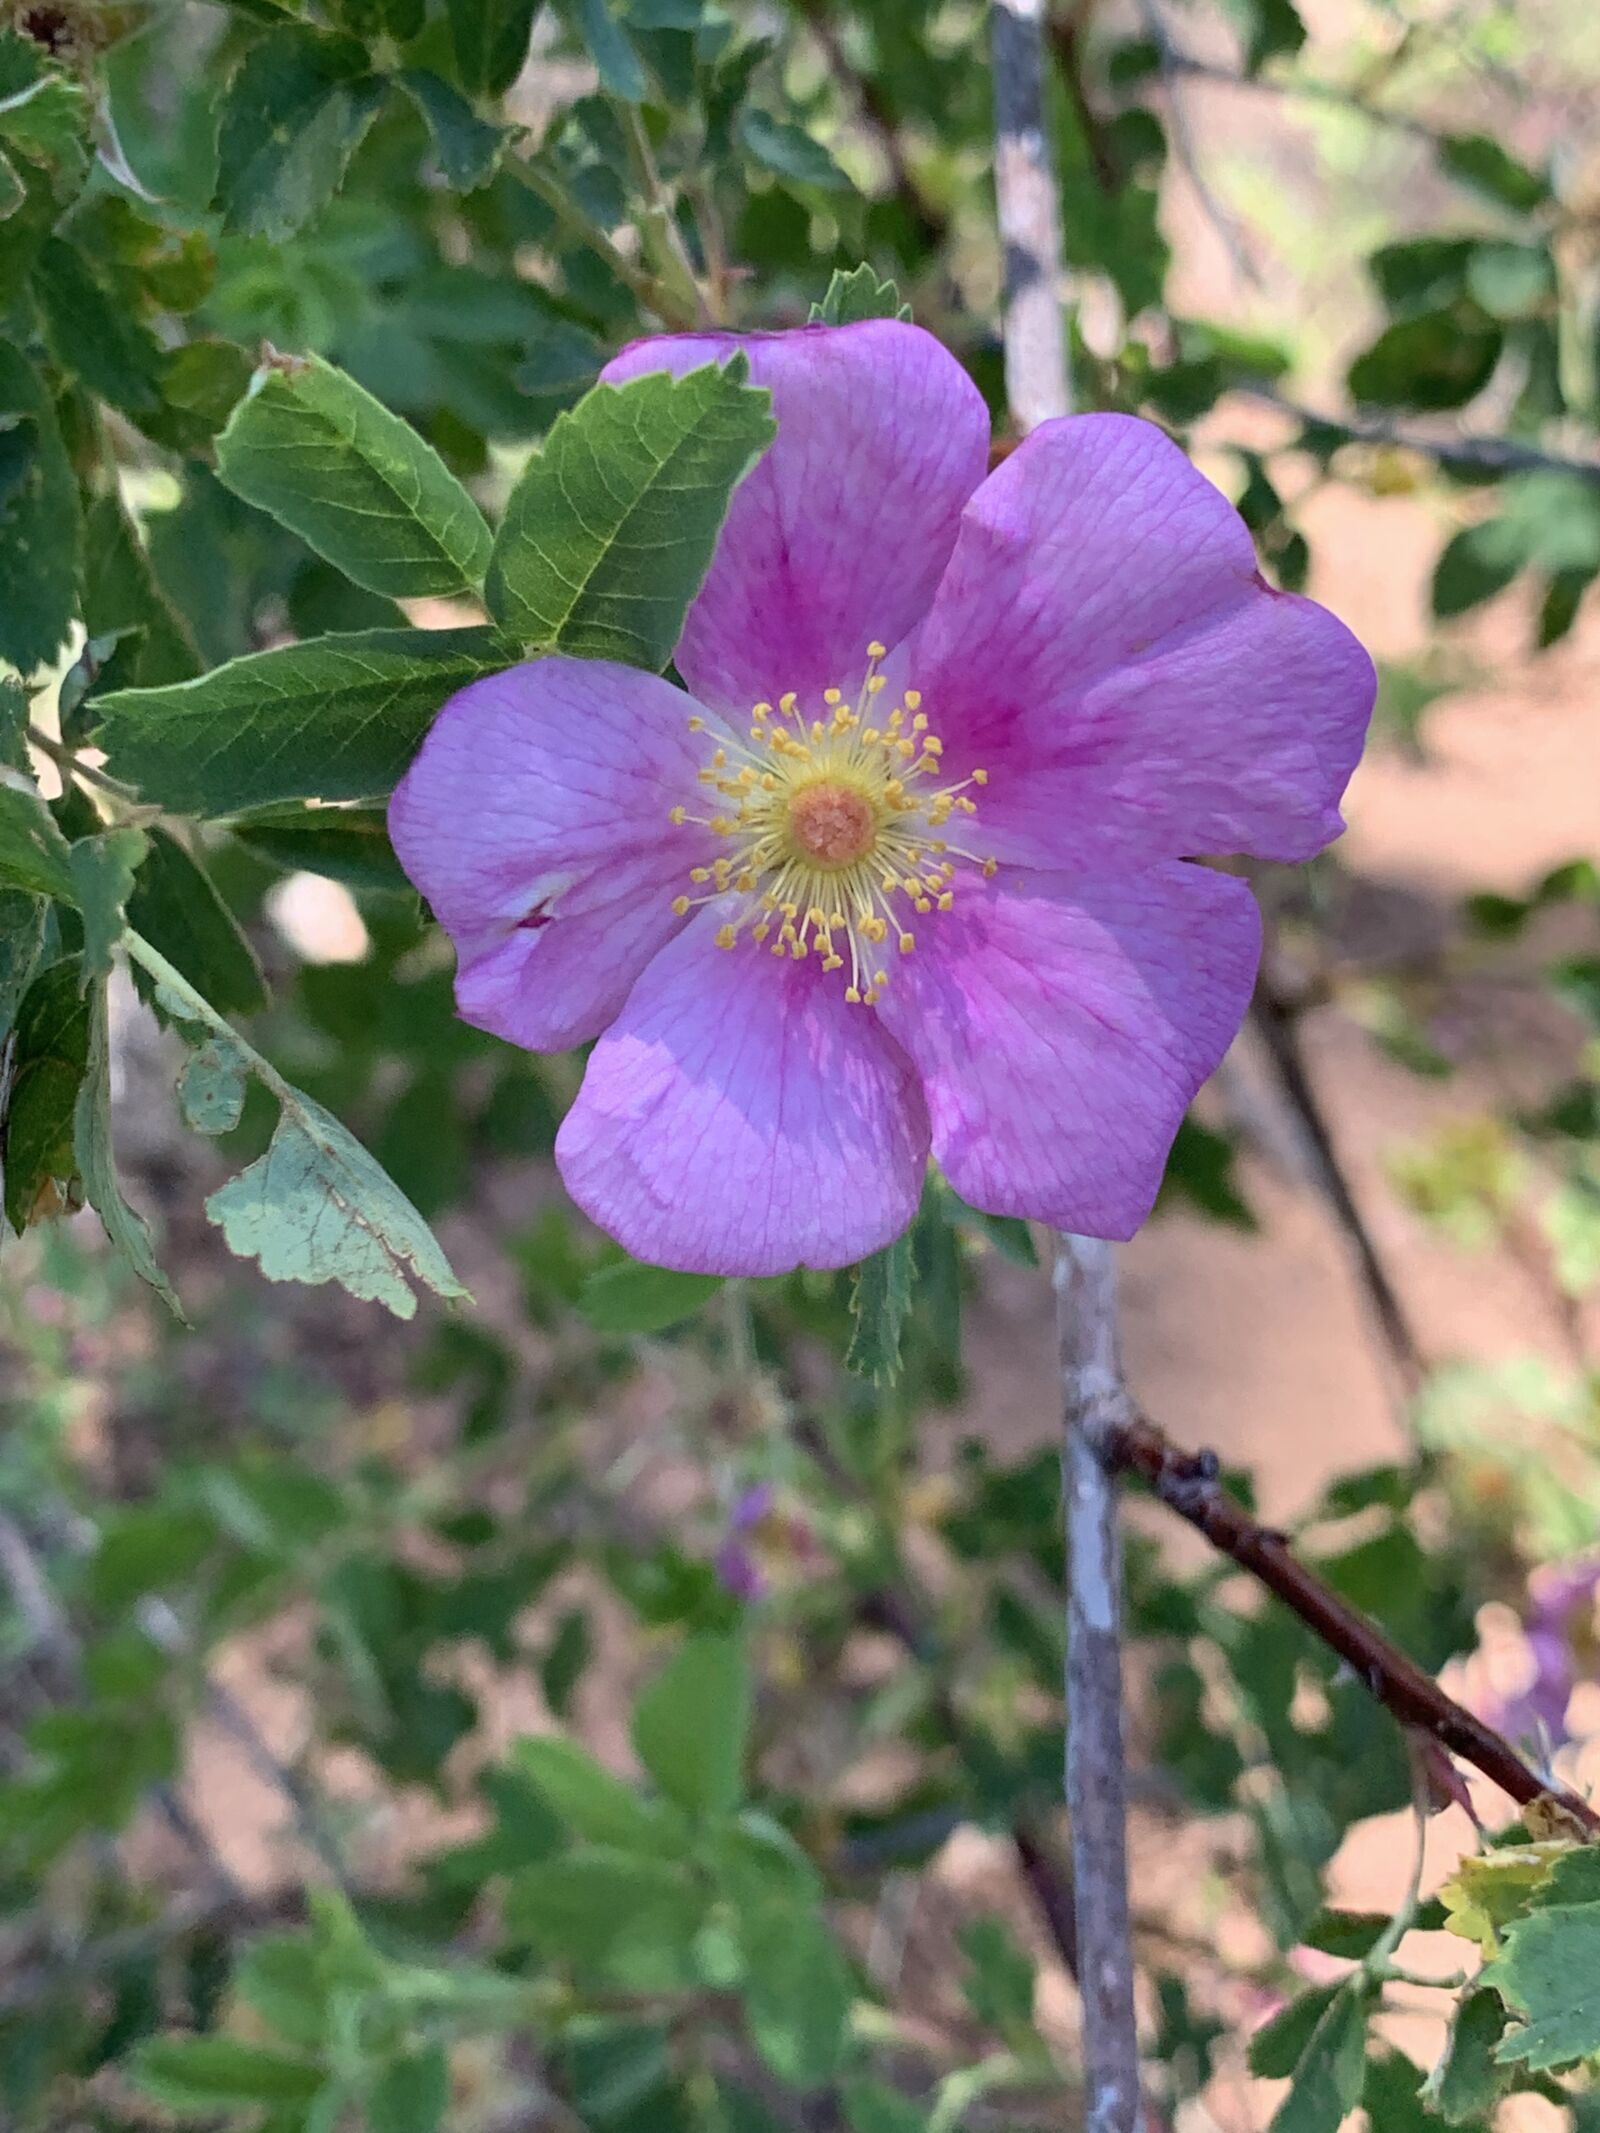 Apple iPhone XS Max sample photo. Wild rose, flower, nature photography